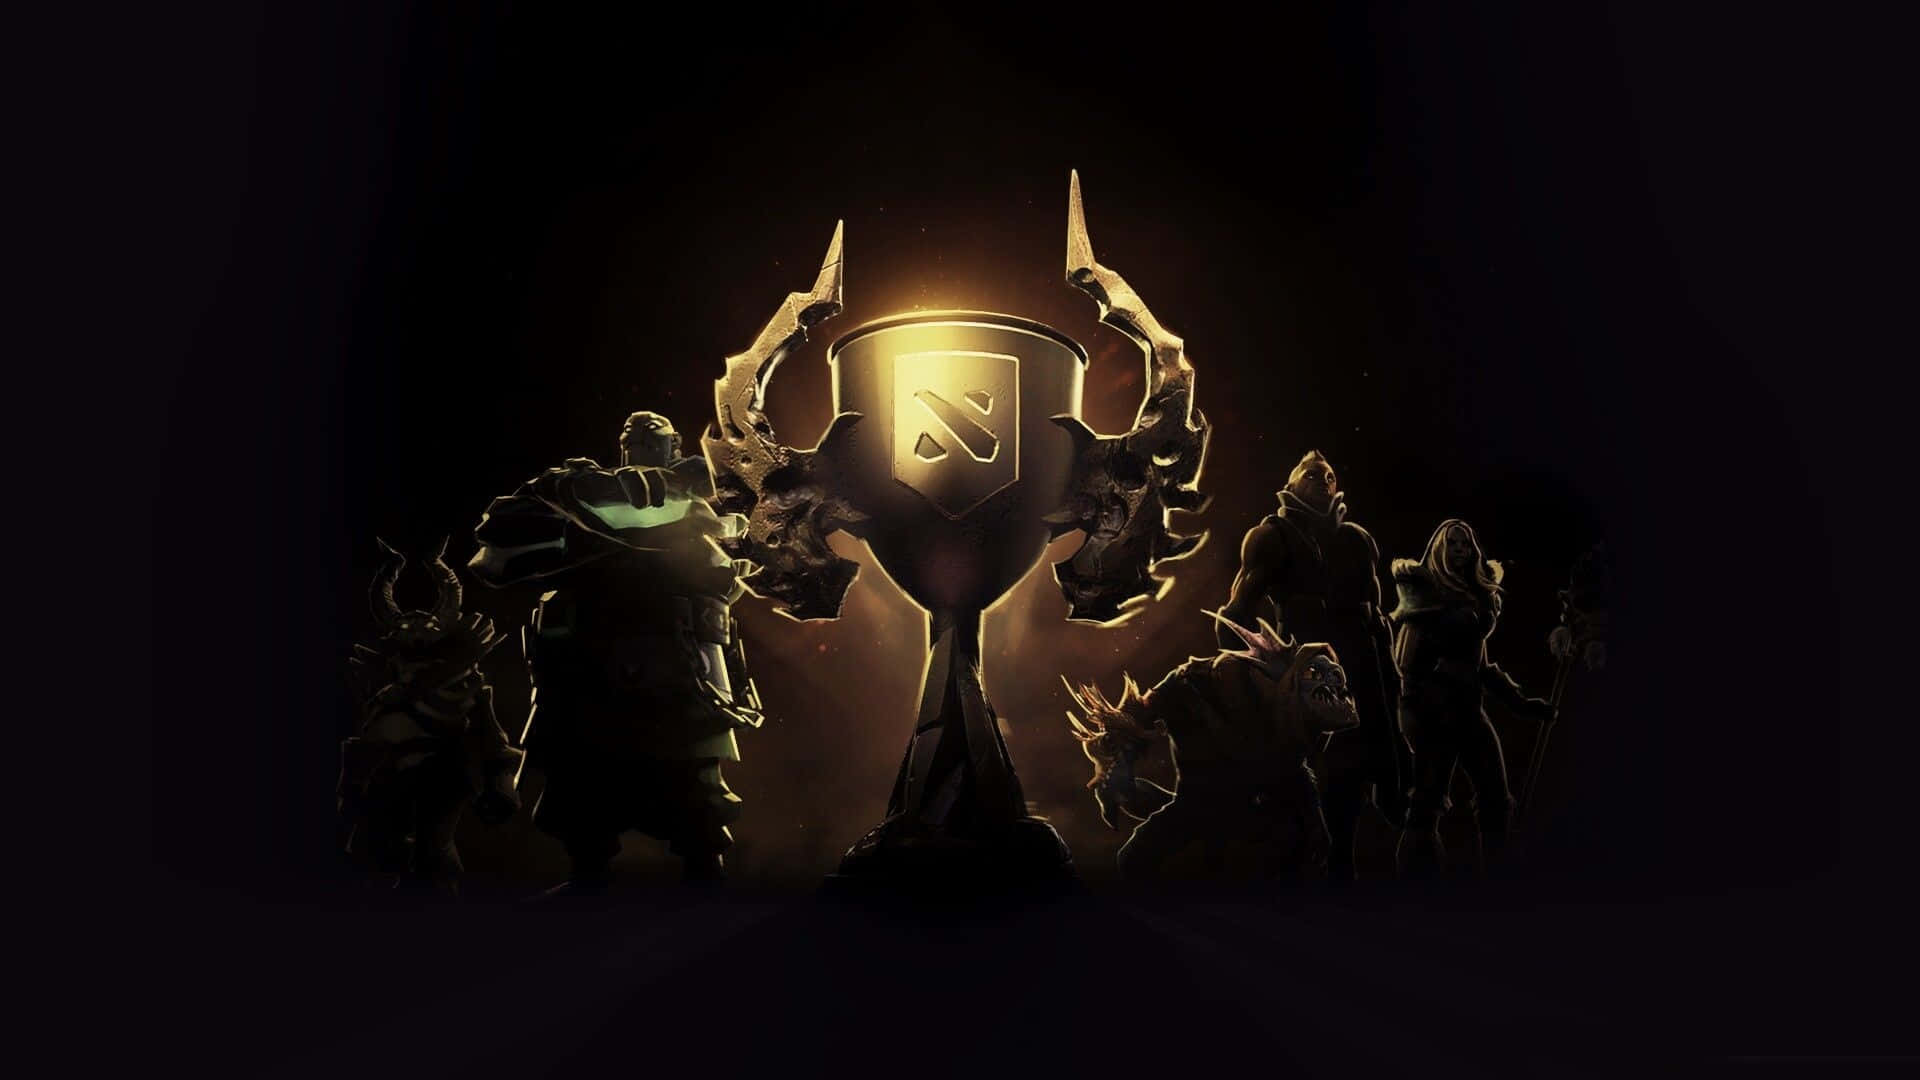 Hd Dota 2 Background Battle Cup Background